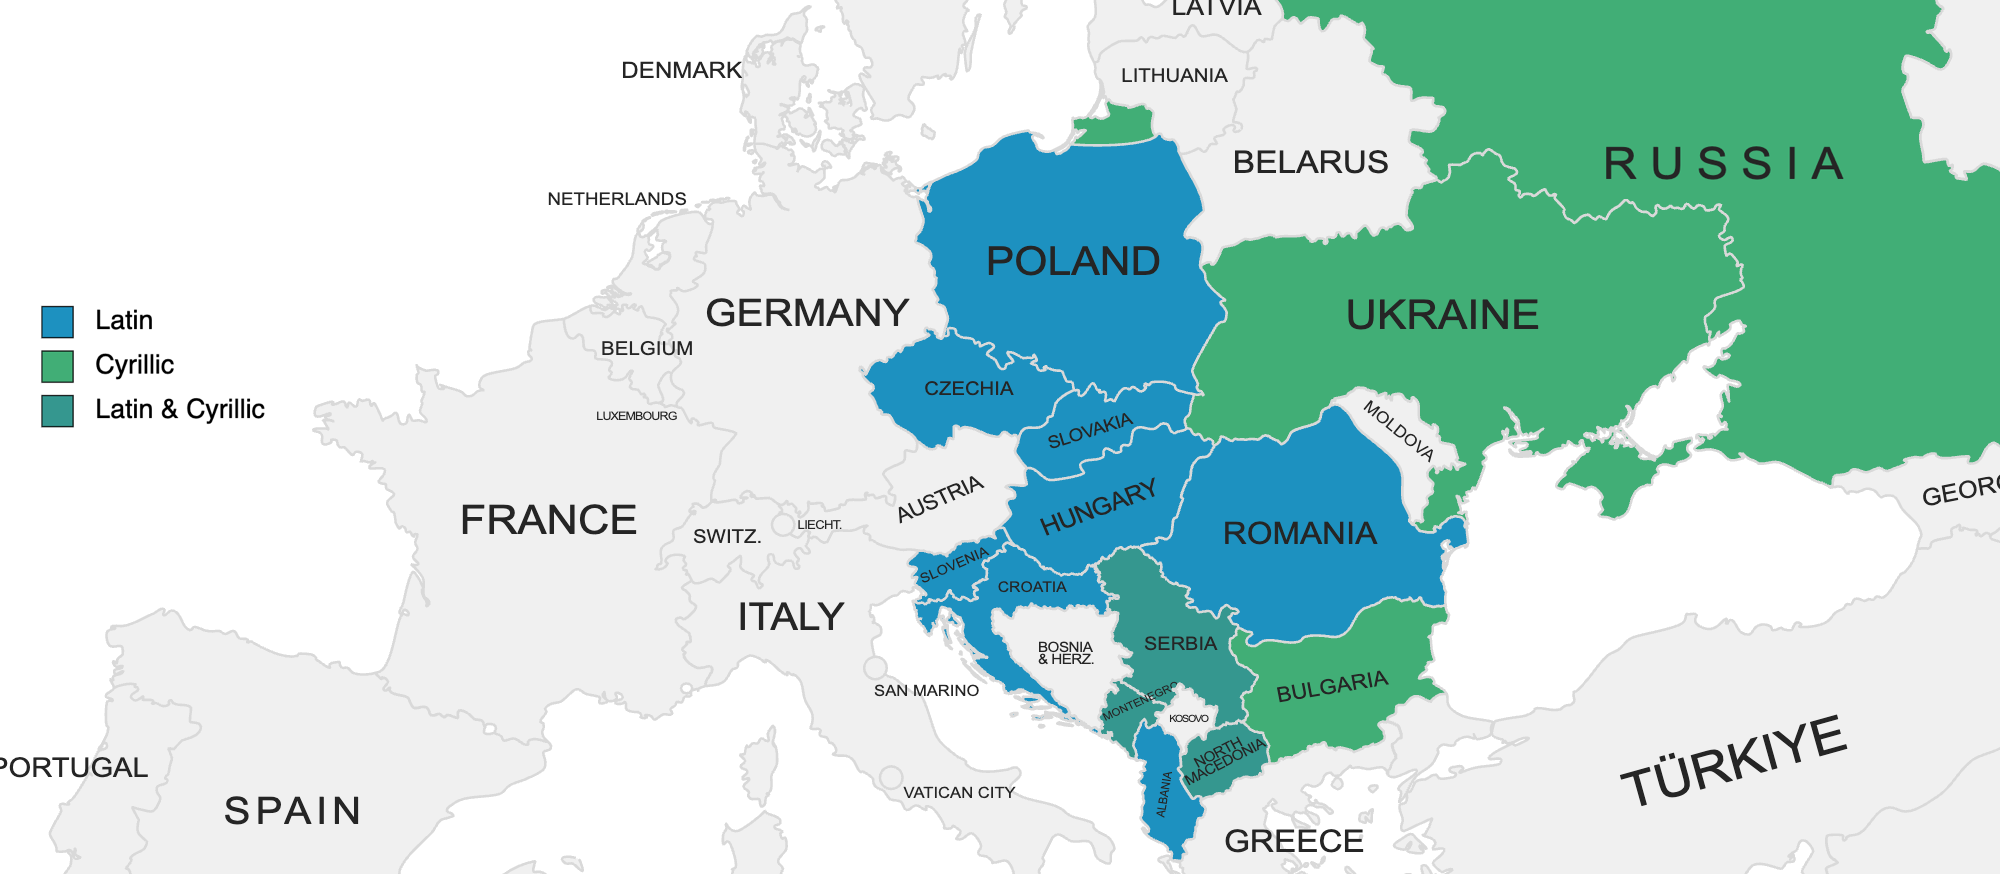 Country-guessing Eastern Europe